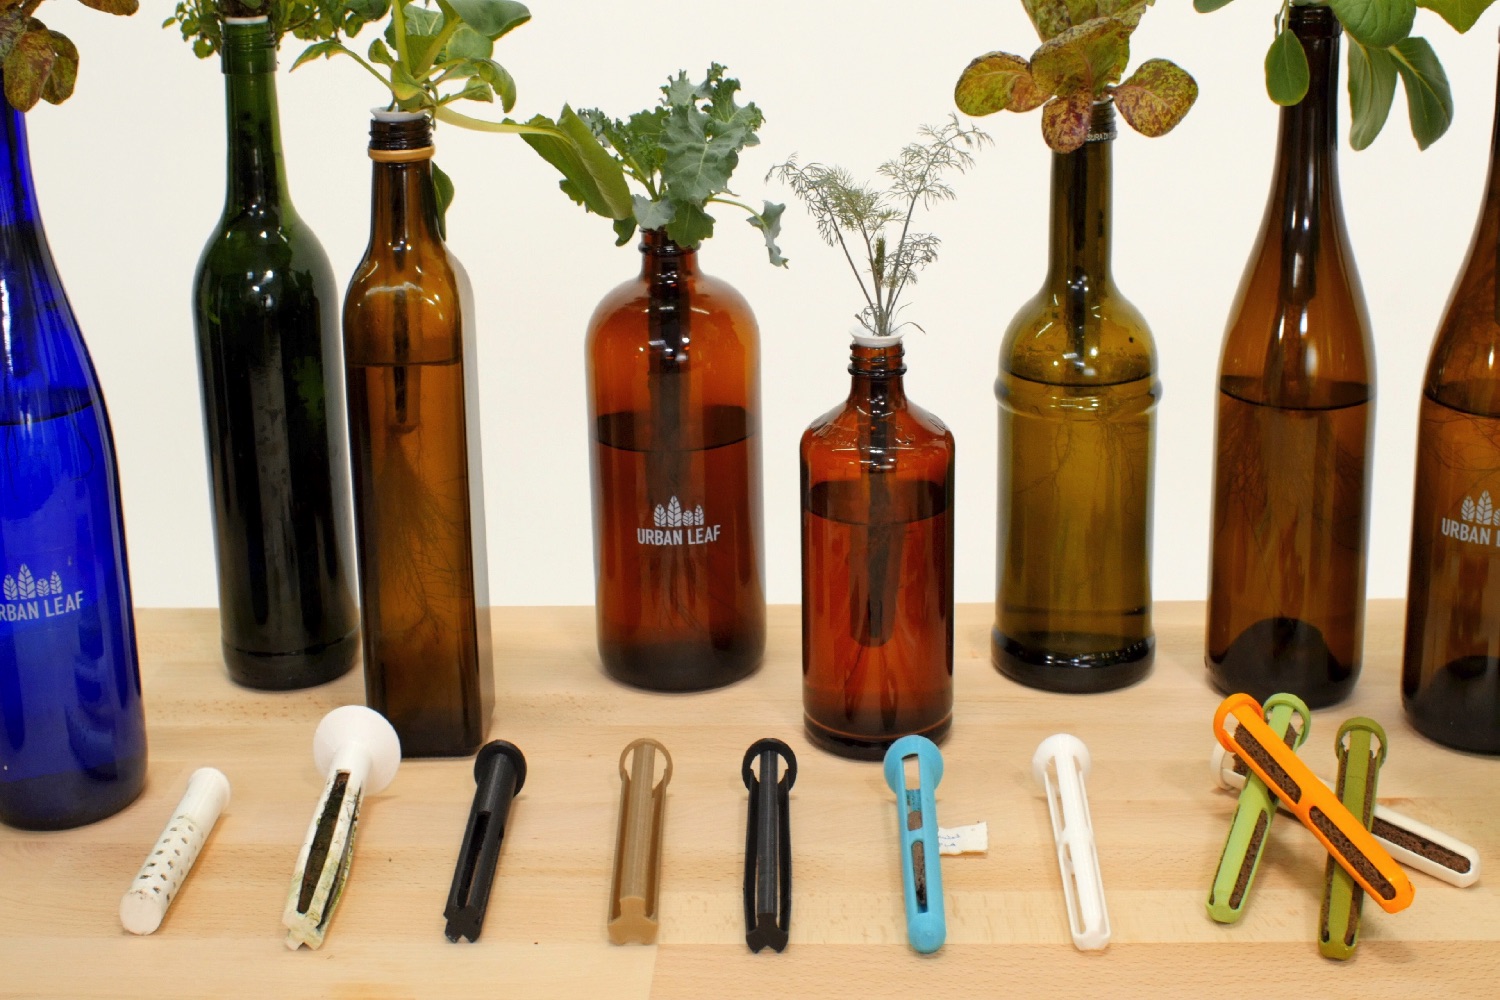 This $22 Kit Turns Your Empty Wine Bottles Into an Herb Garden